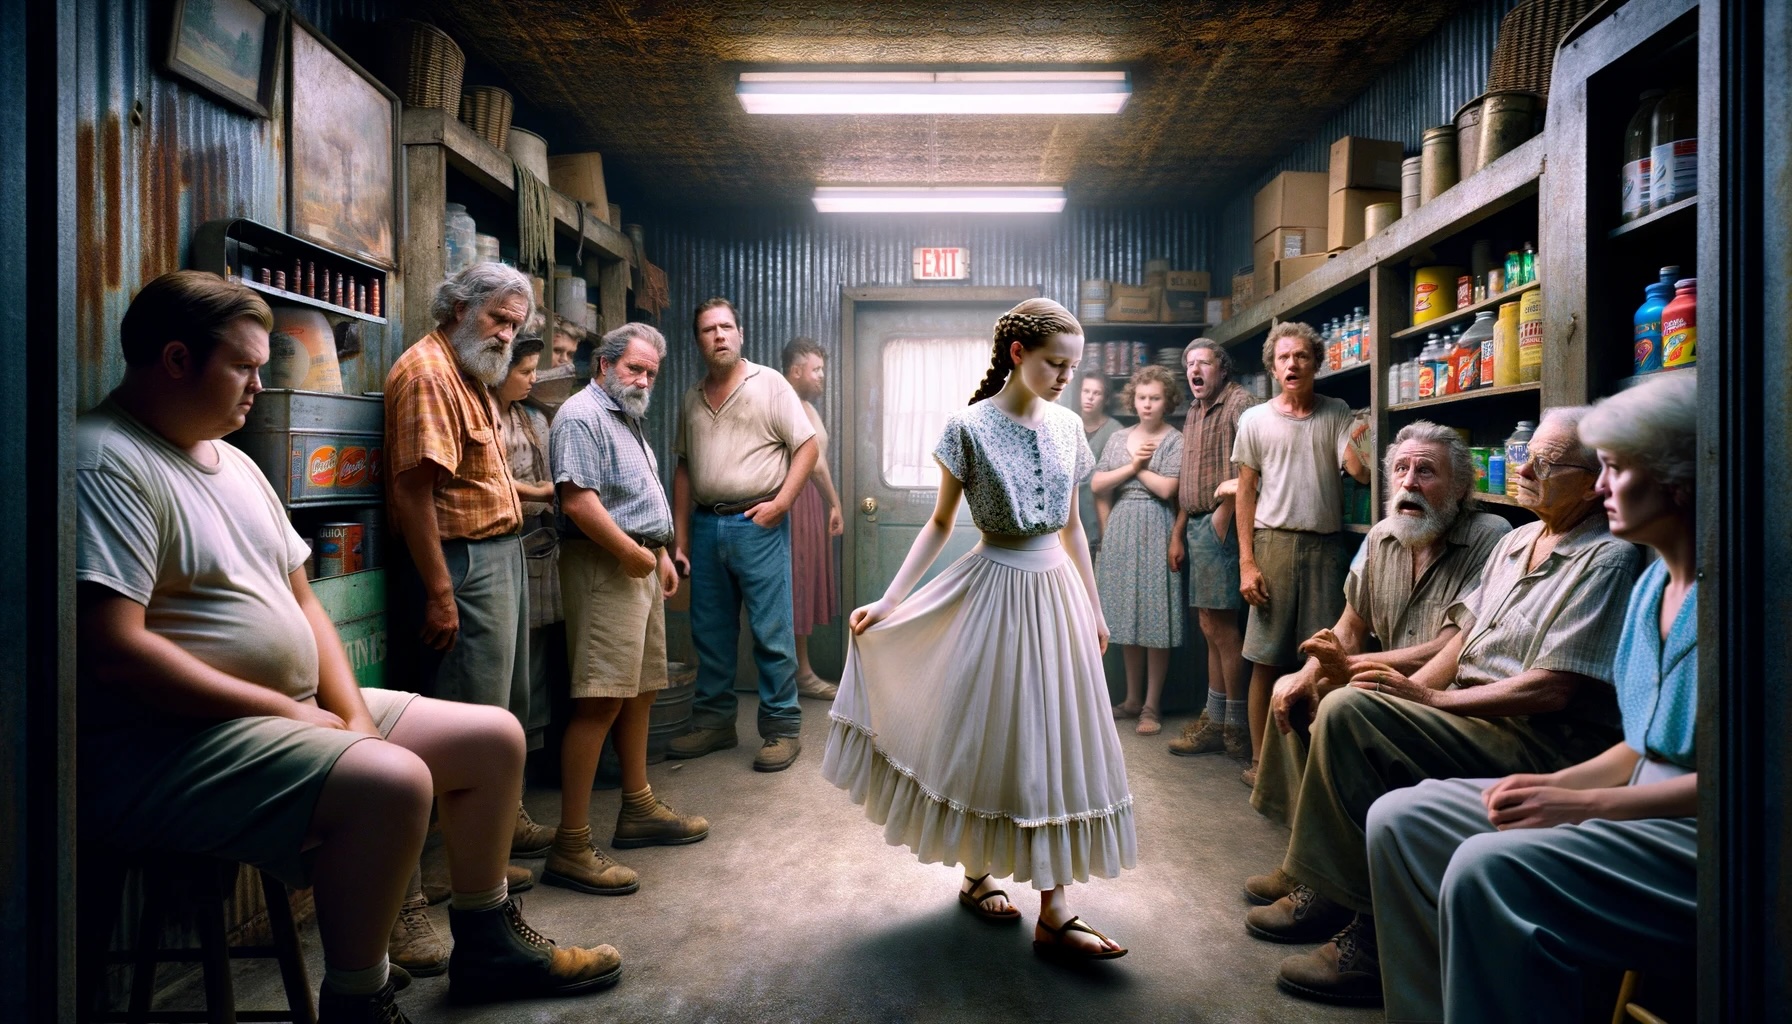 A young woman in a vintage-style dress adjusts her skirt in a rustic store, surrounded by various onlookers.